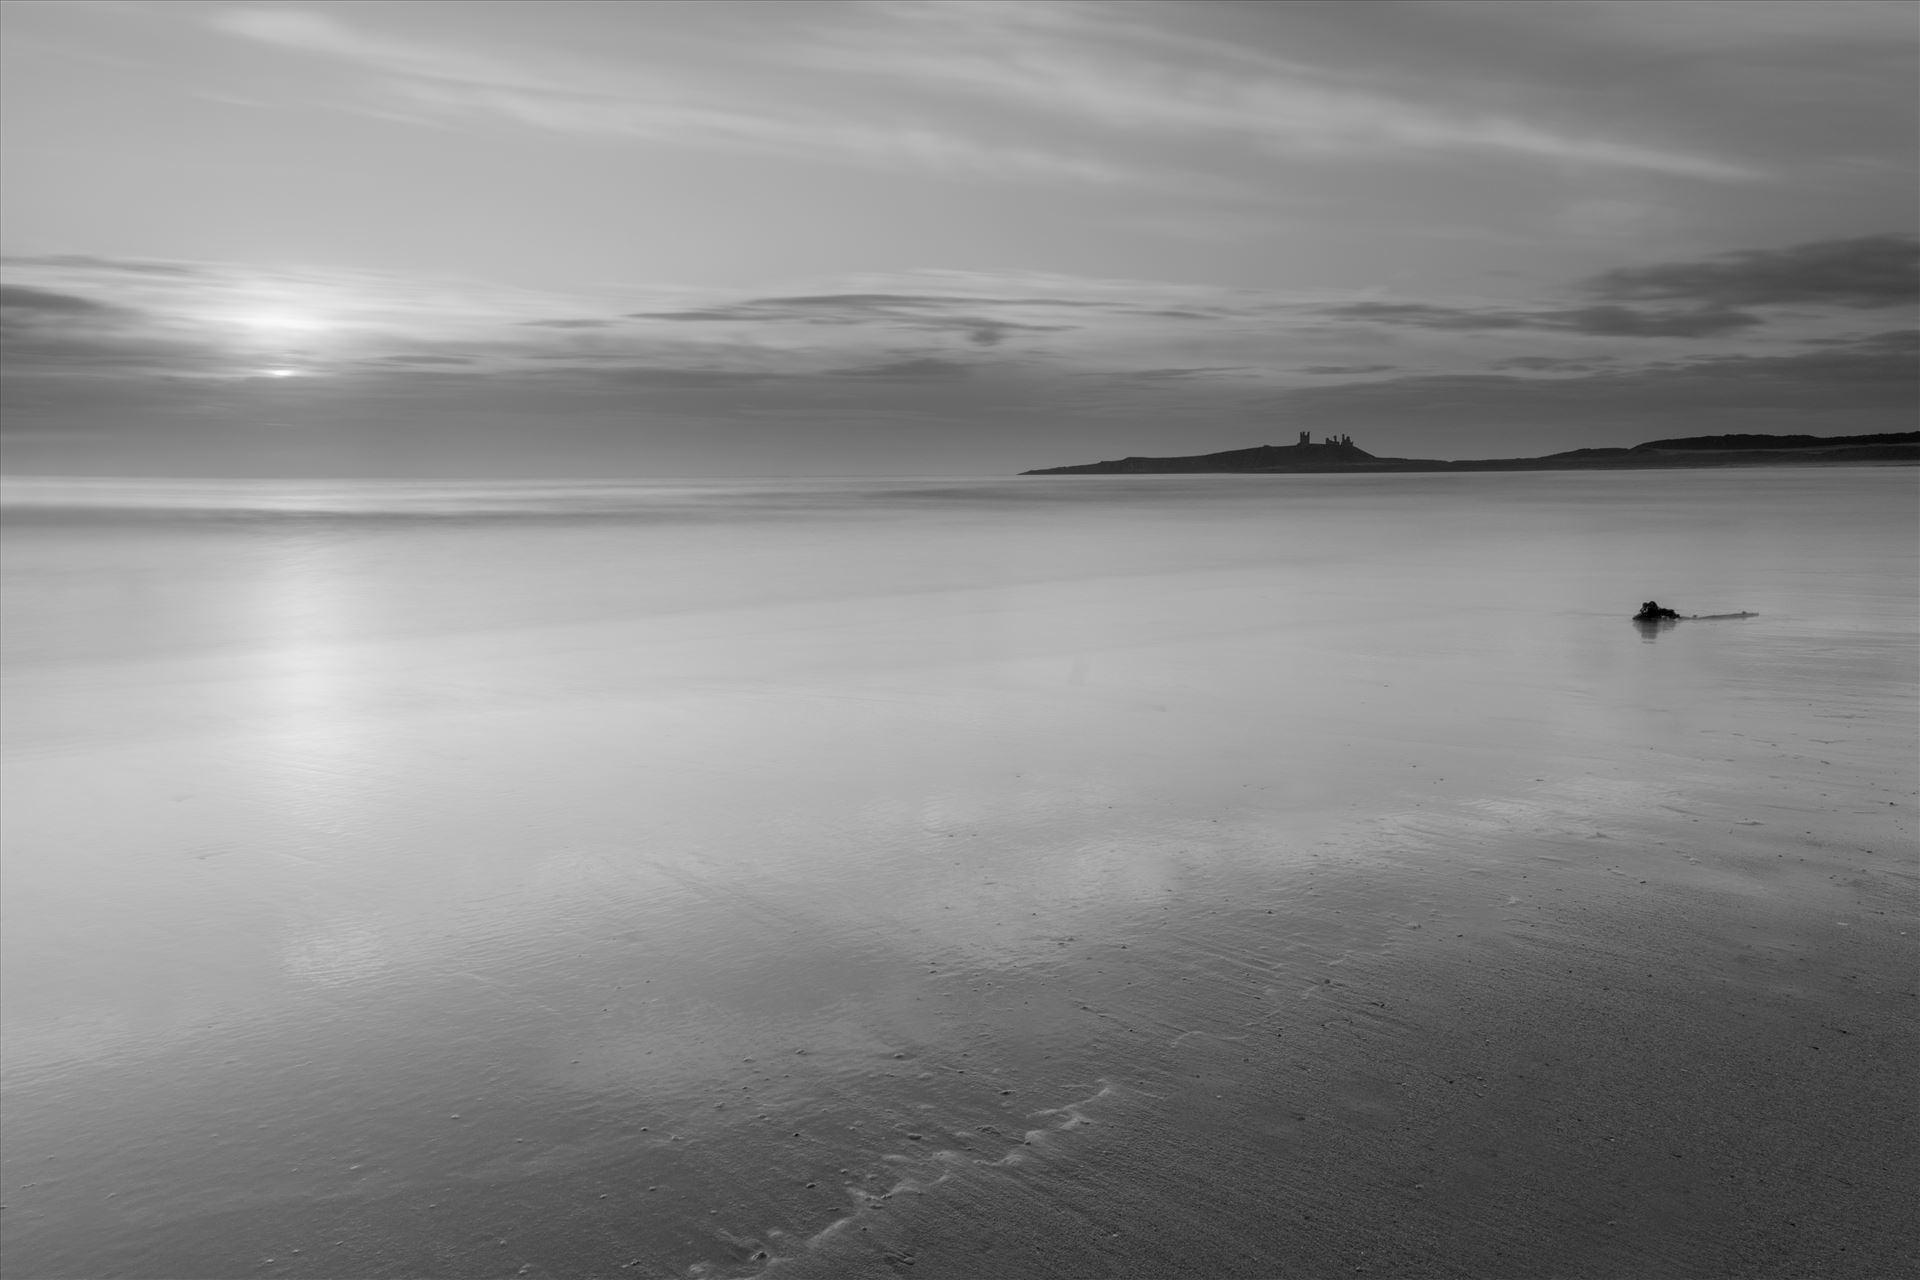 Sunrise at Embleton Bay, Northumberland. (also in colour) - Embleton Bay is a bay on the North Sea, located to the east of the village of Embleton, Northumberland, England. It lies just to the south of Newton-by-the-Sea and north of Craster by philreay